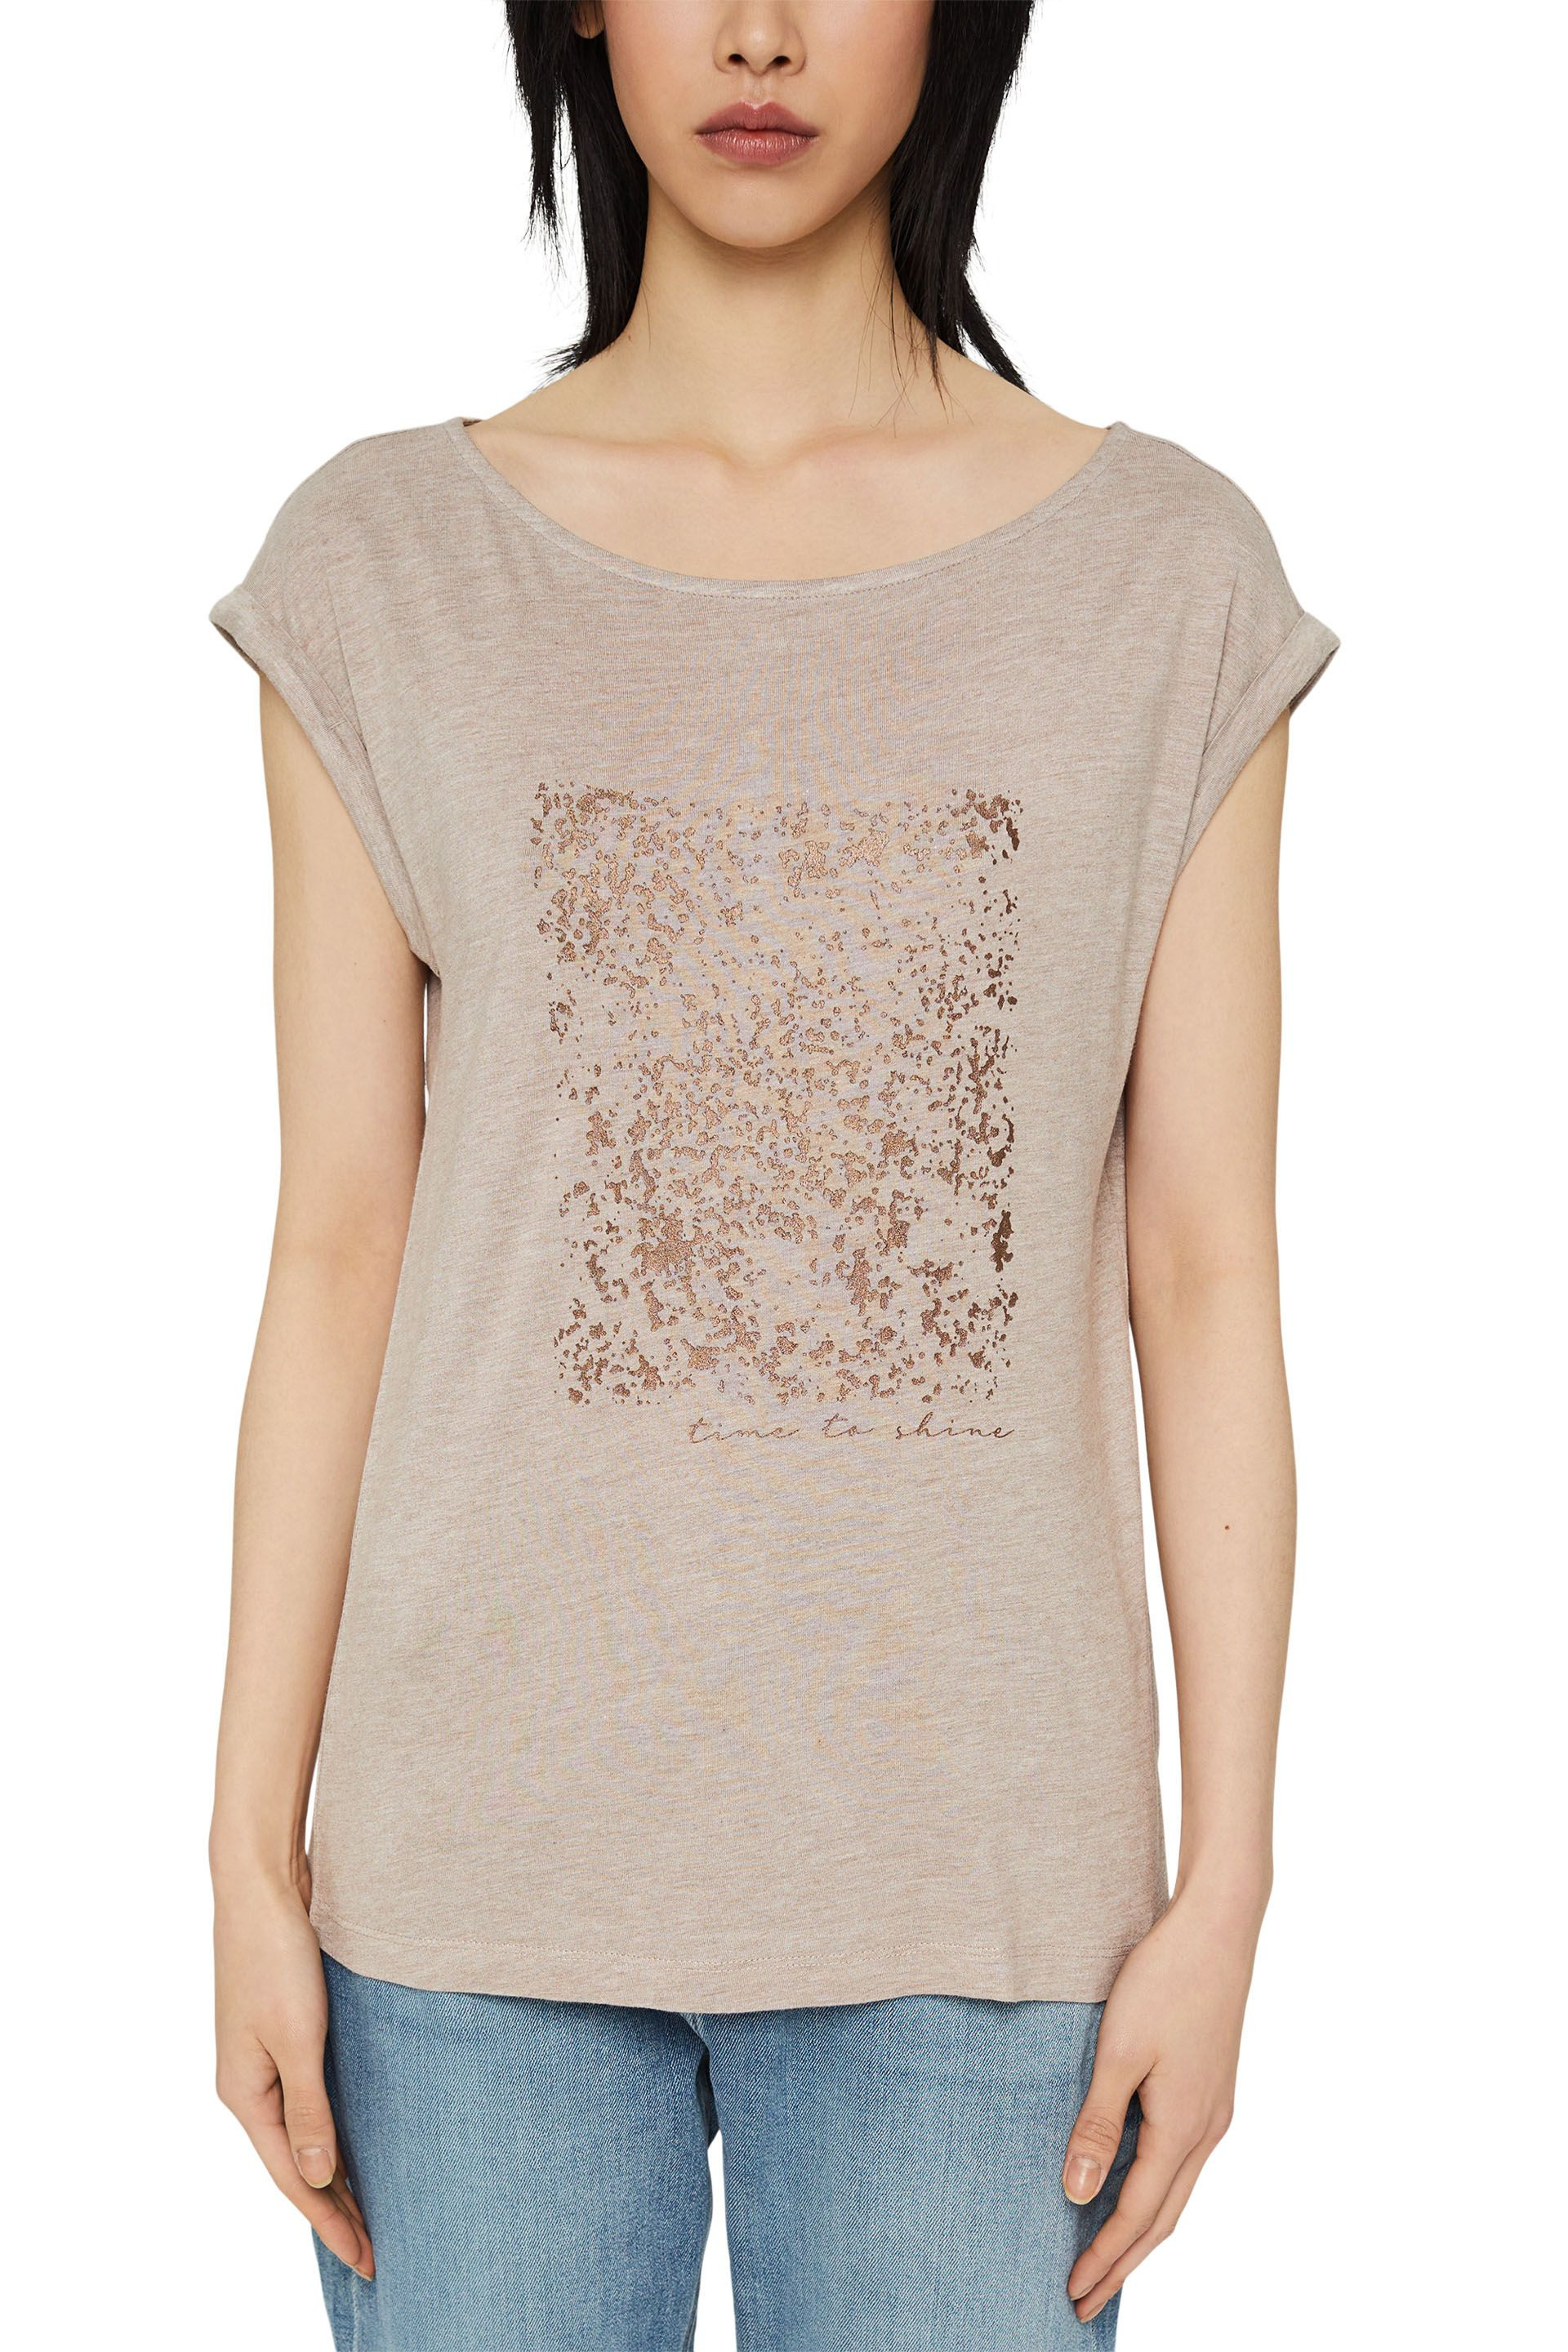 T-shirt in viscosa, Beige torrone, large image number 1